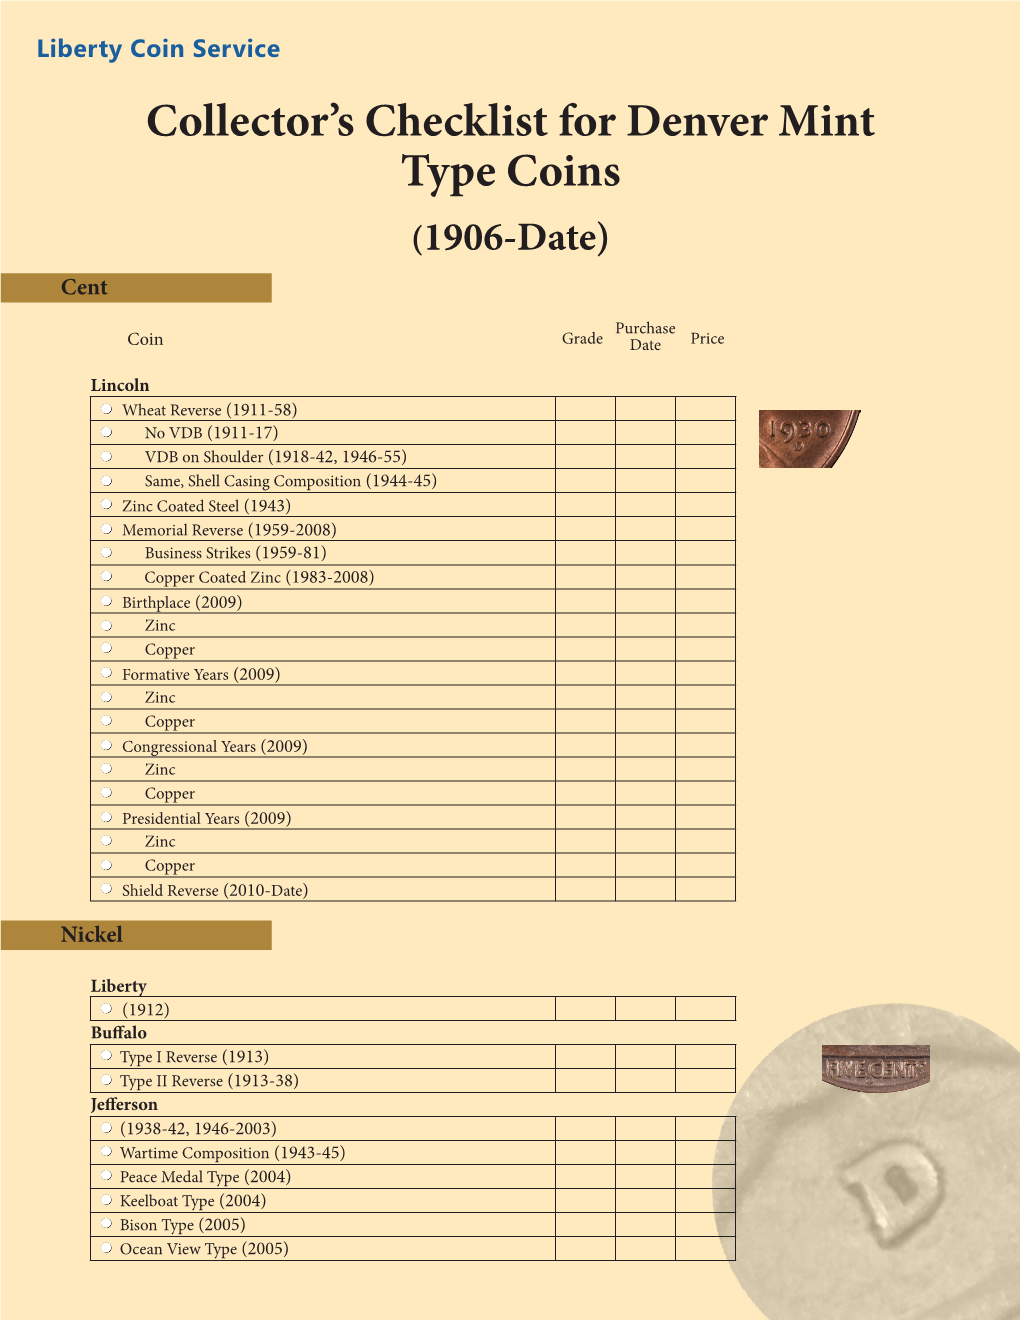 Collector's Checklist for Denver Mint Type Coins